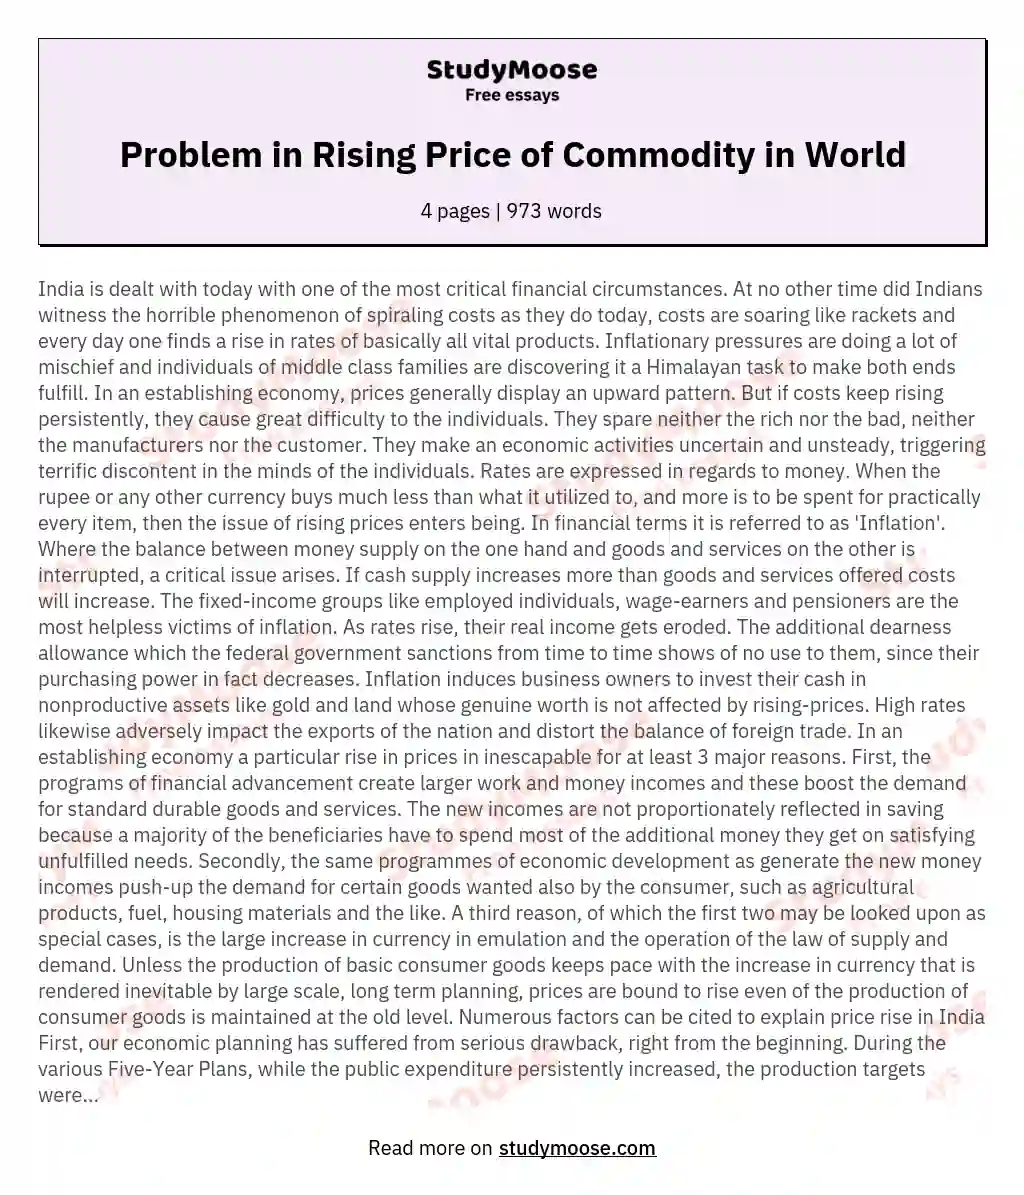 the problem of rising prices